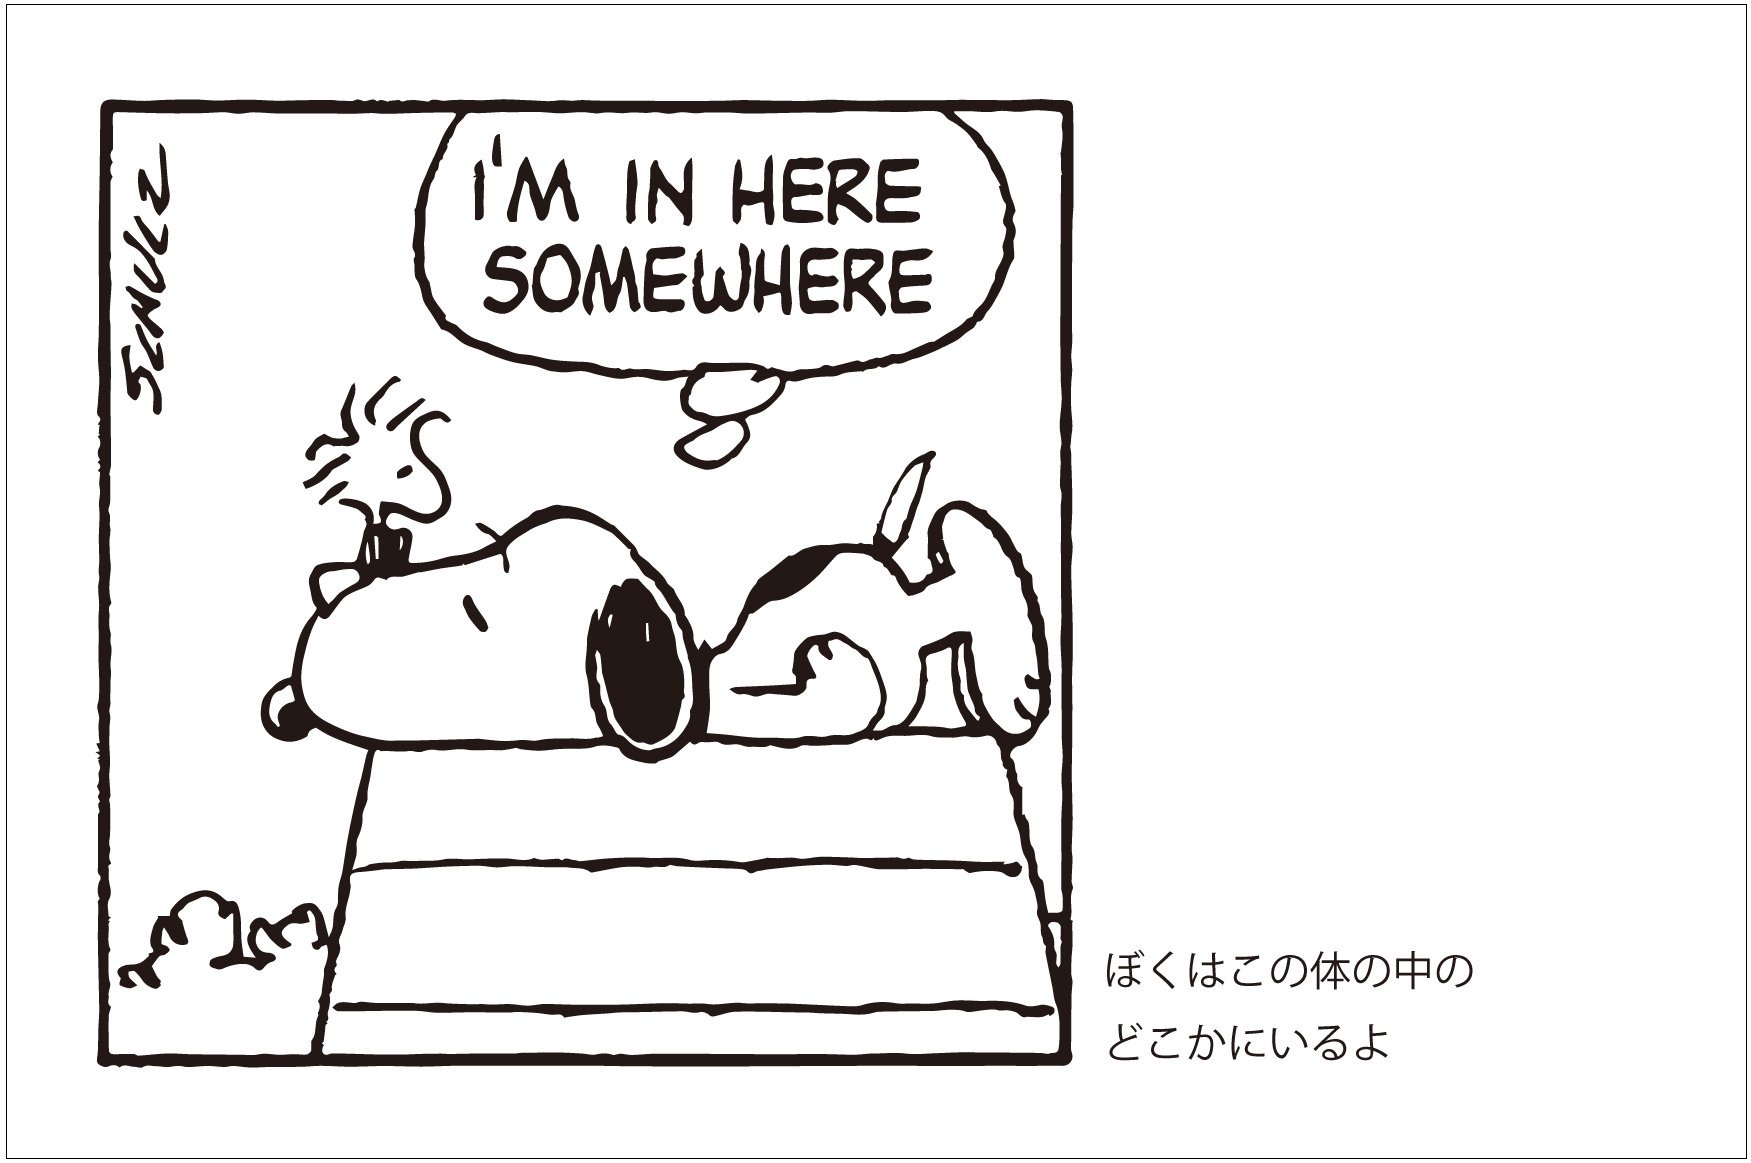 Snoopy In Seasons Quotes From Peanuts 付録 スヌーピー おでかけトートバッグ 雑誌付録ダイアリー 発売予定 レビューブログ